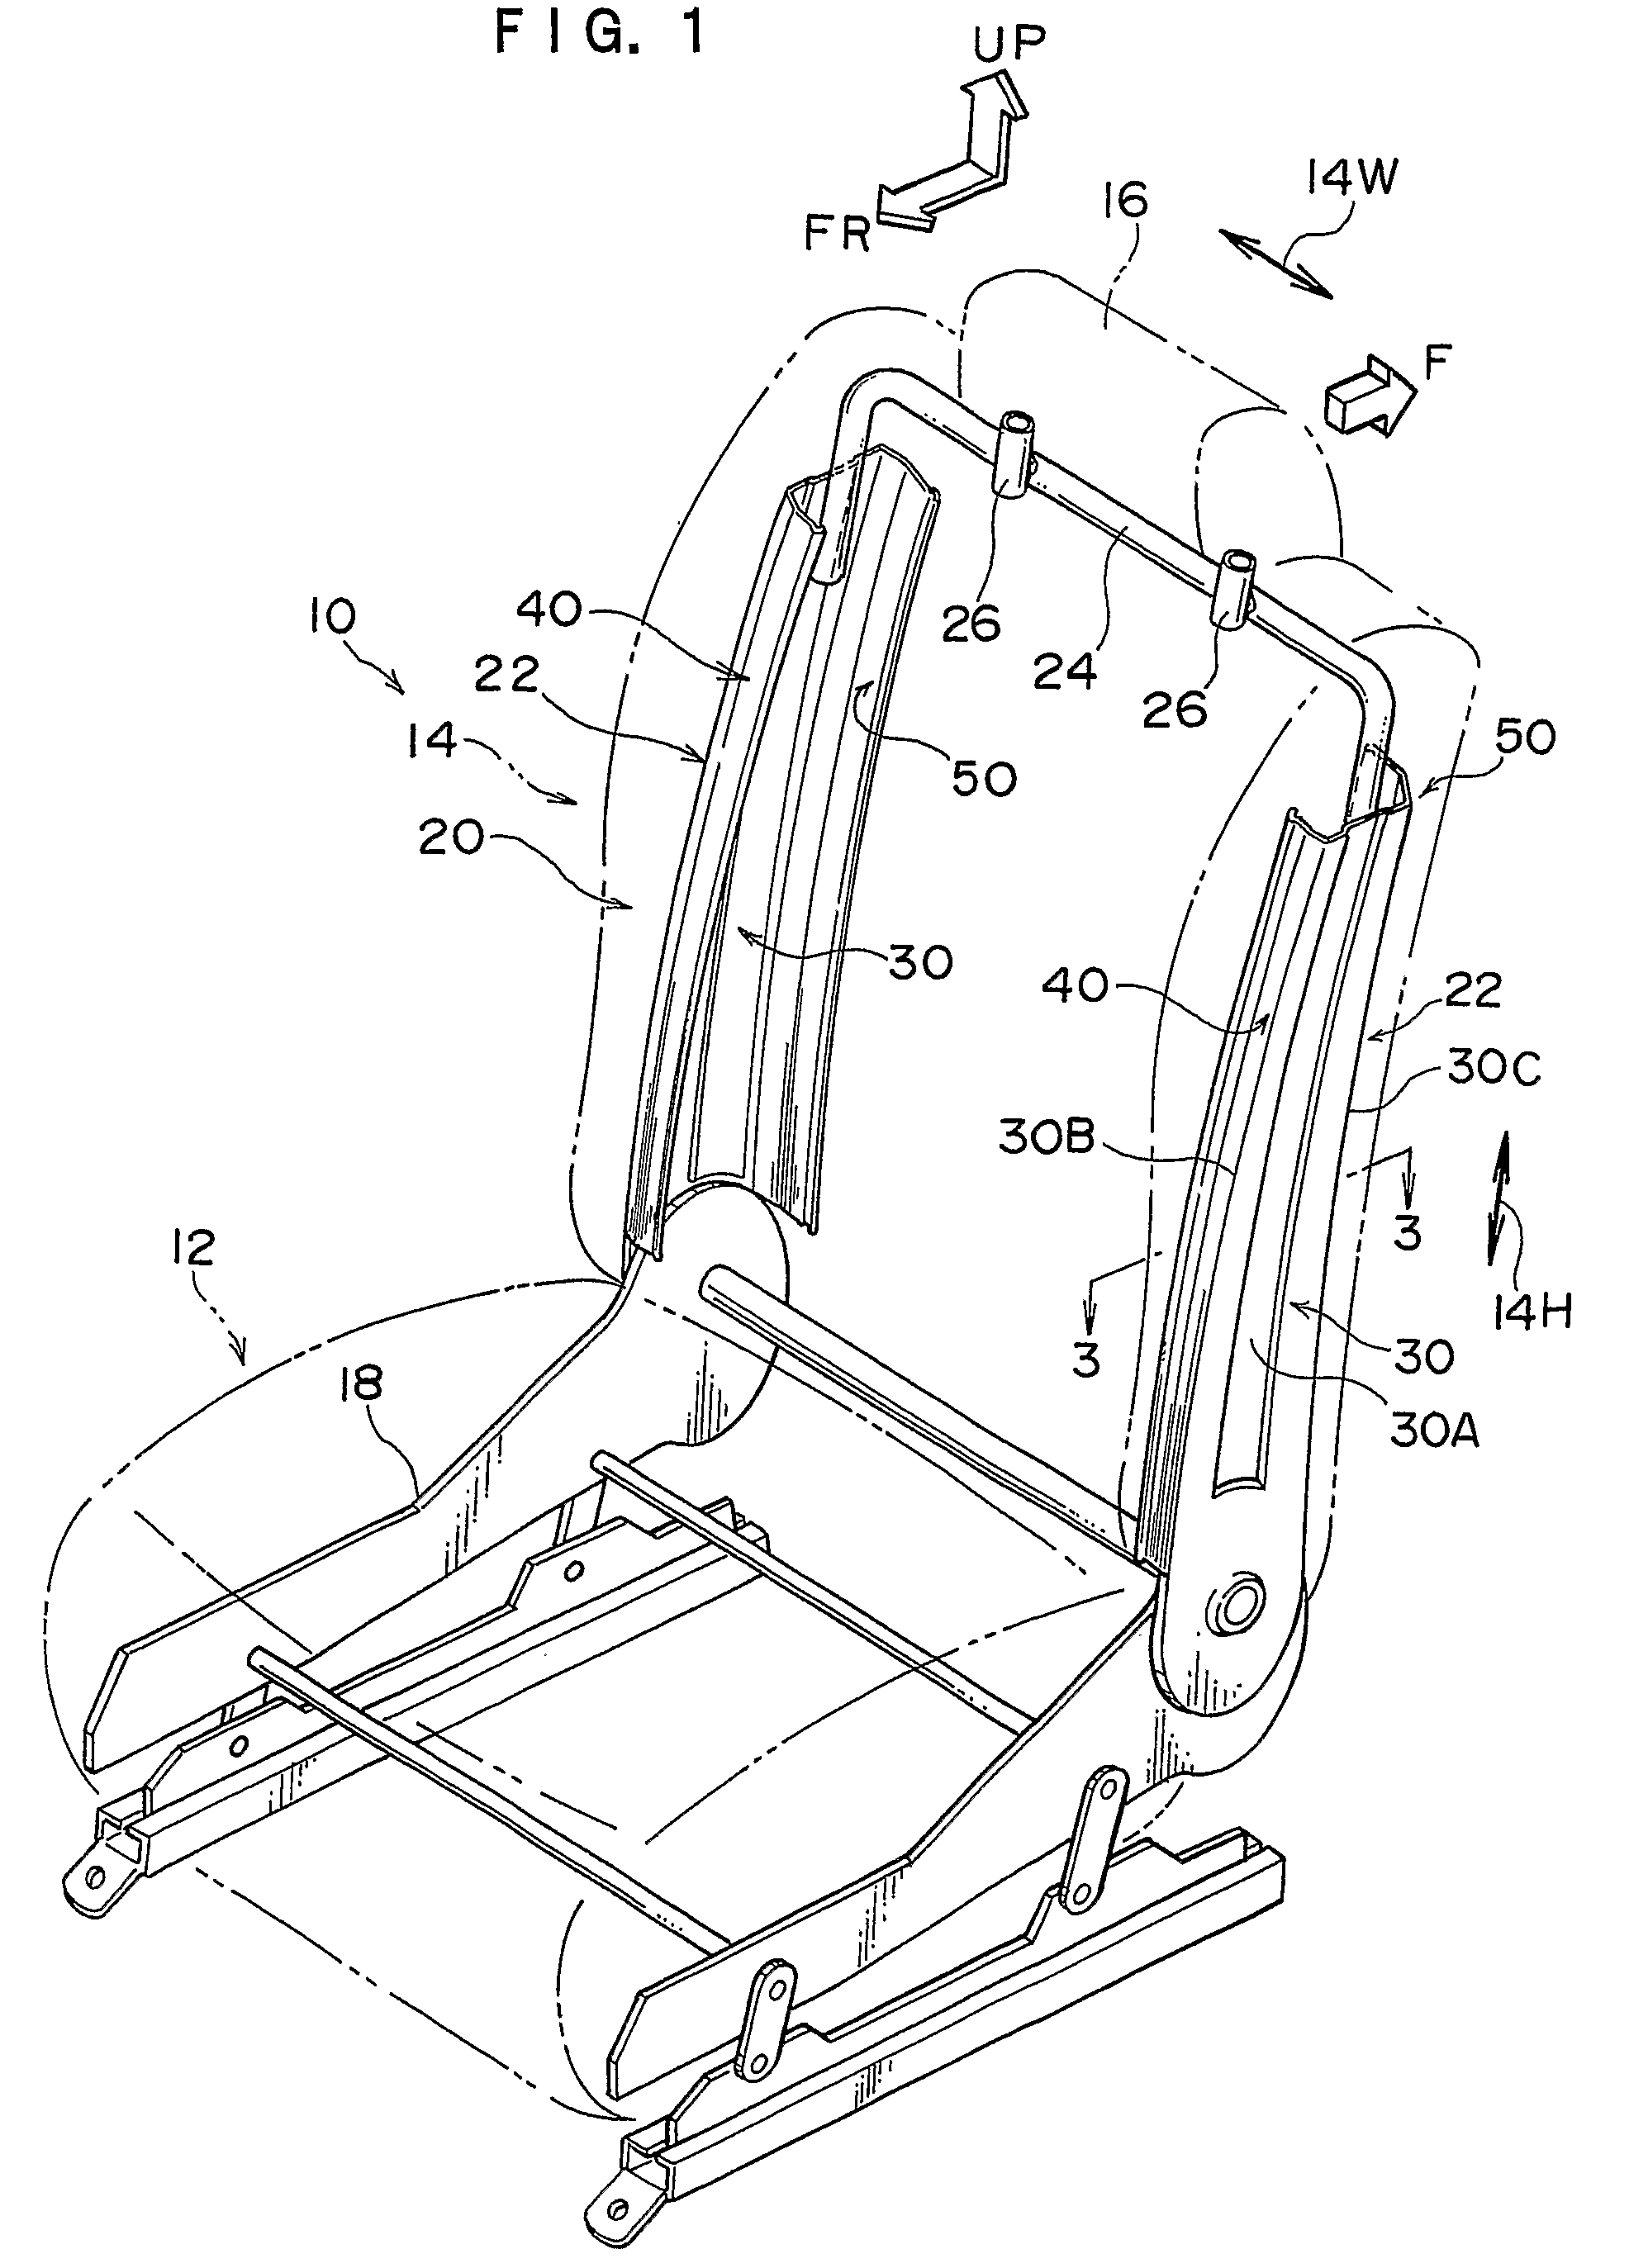 Seat back frame for a vehicle